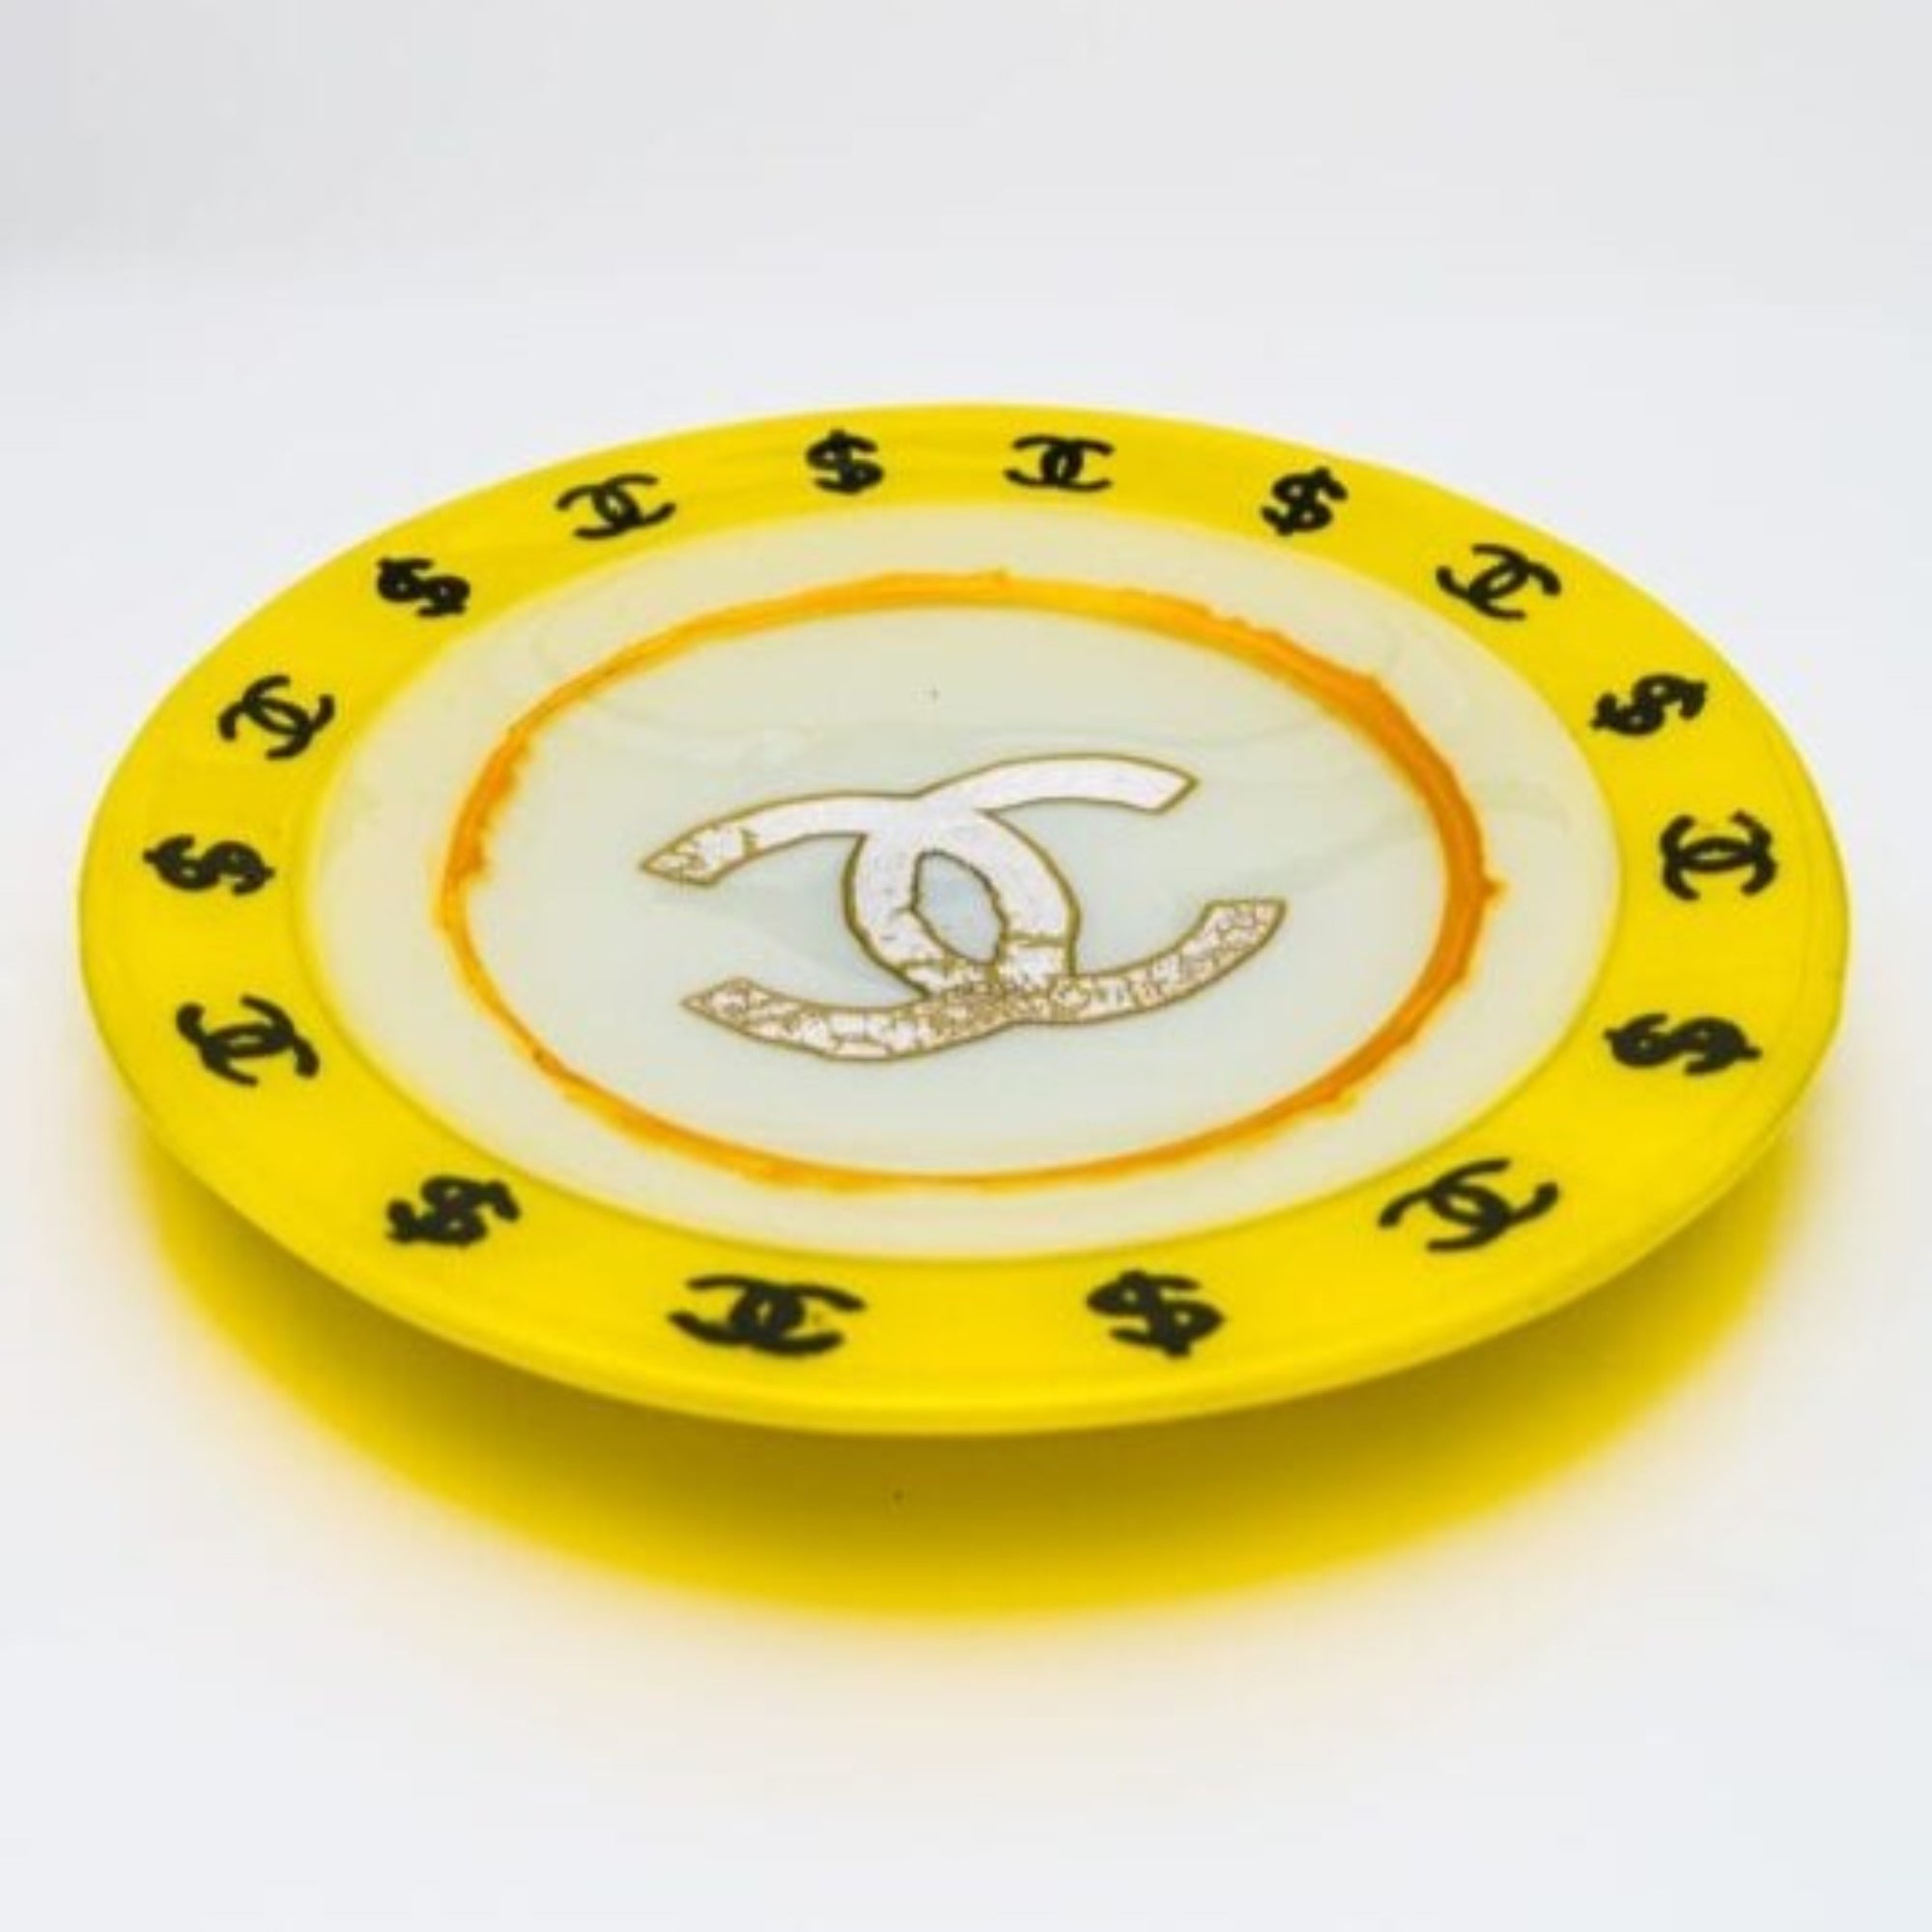 Chanel Sunny Side Up plate